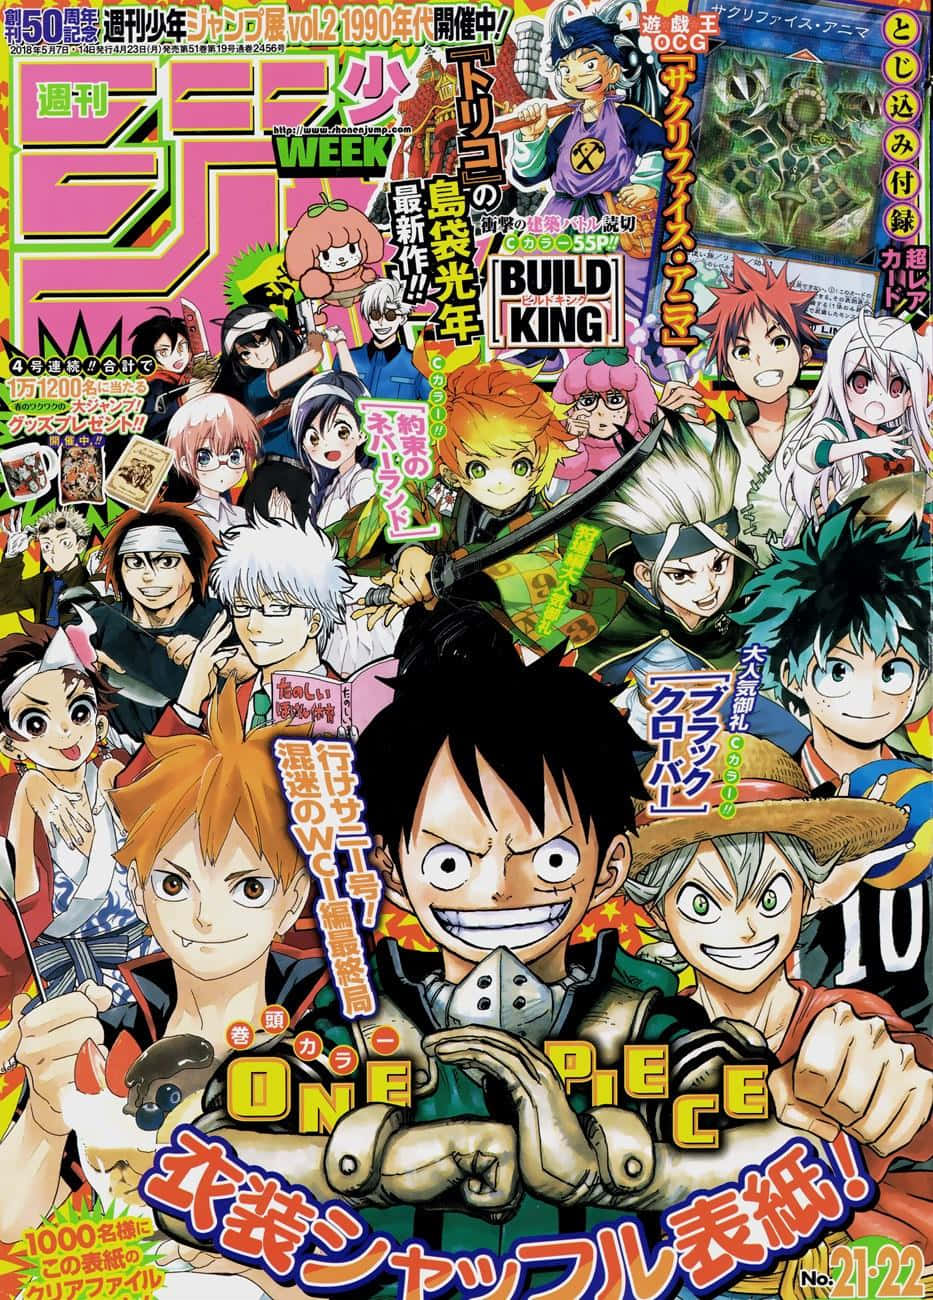 Get lost in a world of Japanese manga with Shonen Jump! Wallpaper